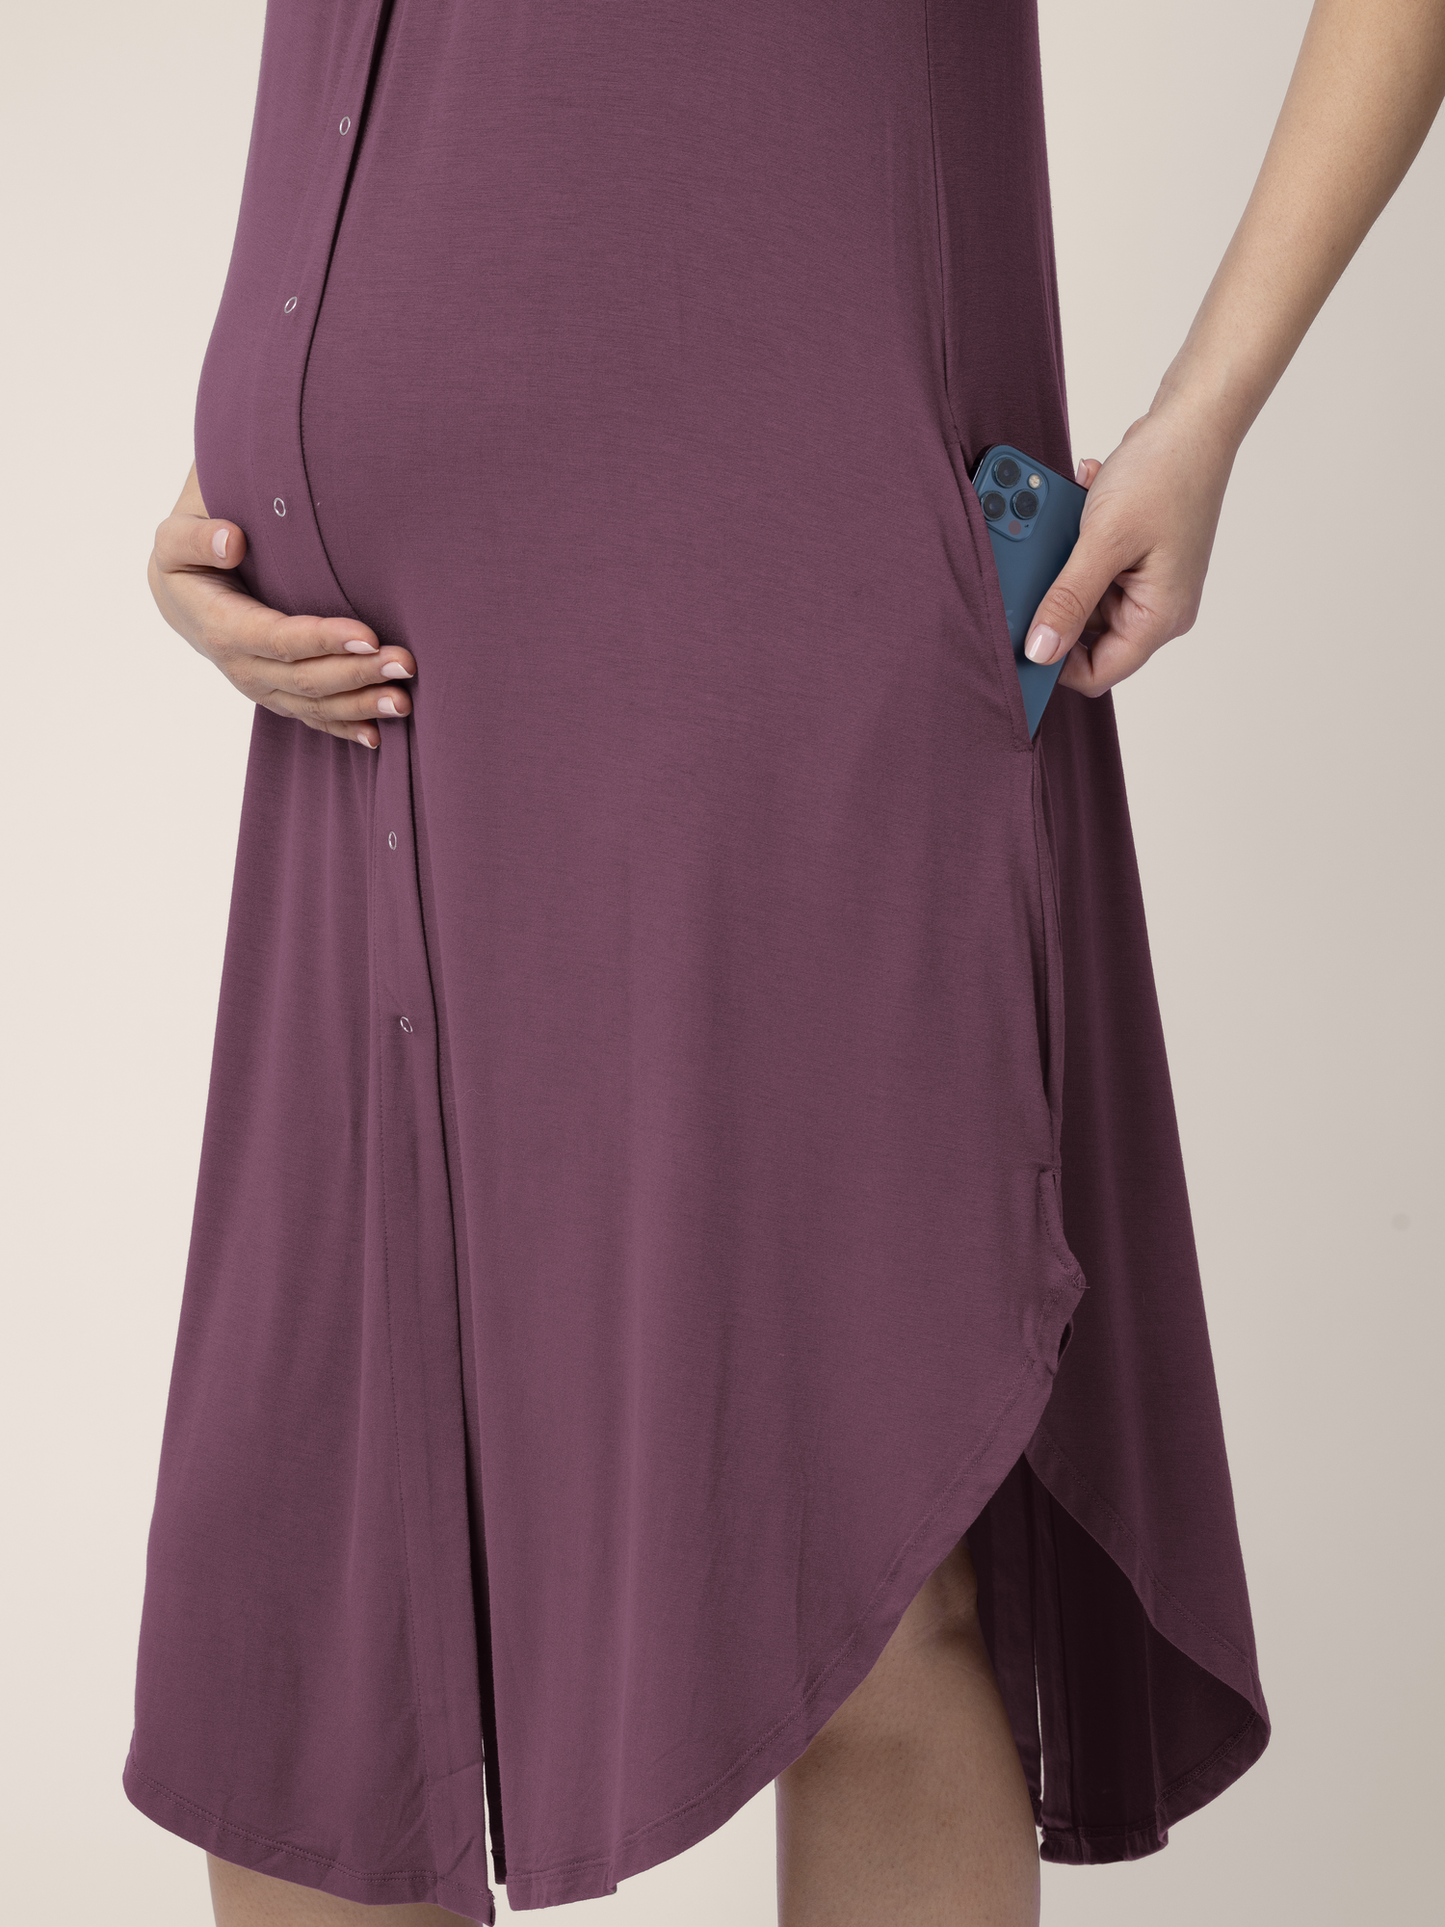 Closeup of the pocket on the Ruffle Strap Labor & Delivery Gown in Burgundy Plum